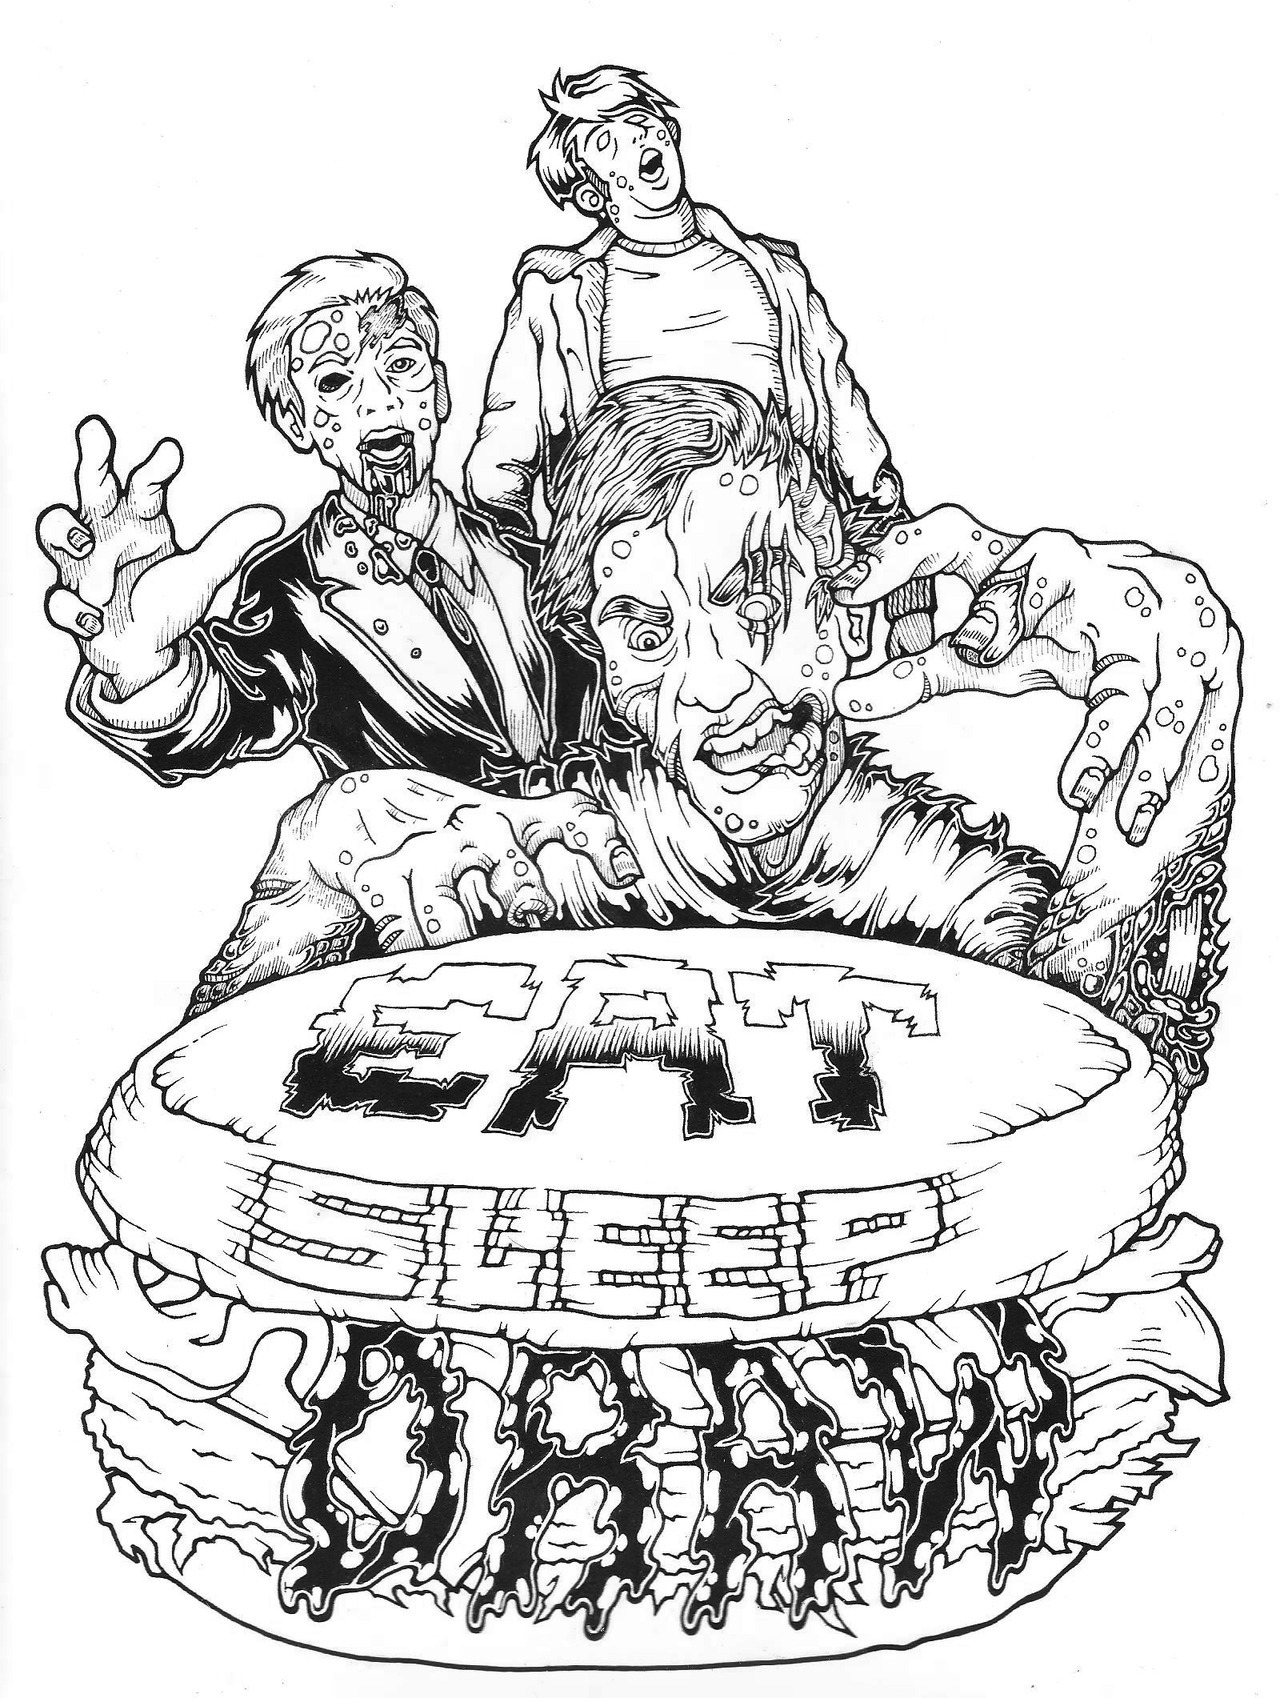 The original artwork for the recently released EatSleepDraw sketchbook!I&rsquo;m super proud of this guy and it was incredibly fun to draw.The number of hours pumped into it was totally worth it!Drawn with Micron Pens on Watercolour Paper  &mdash;&mdash; Happy Friday the 13th! Use the code FRIDAY13 to get 13% off your entire order in our store. ($10 min. purchase)  Offer good TODAY ONLY. Always free global shipping. check em out